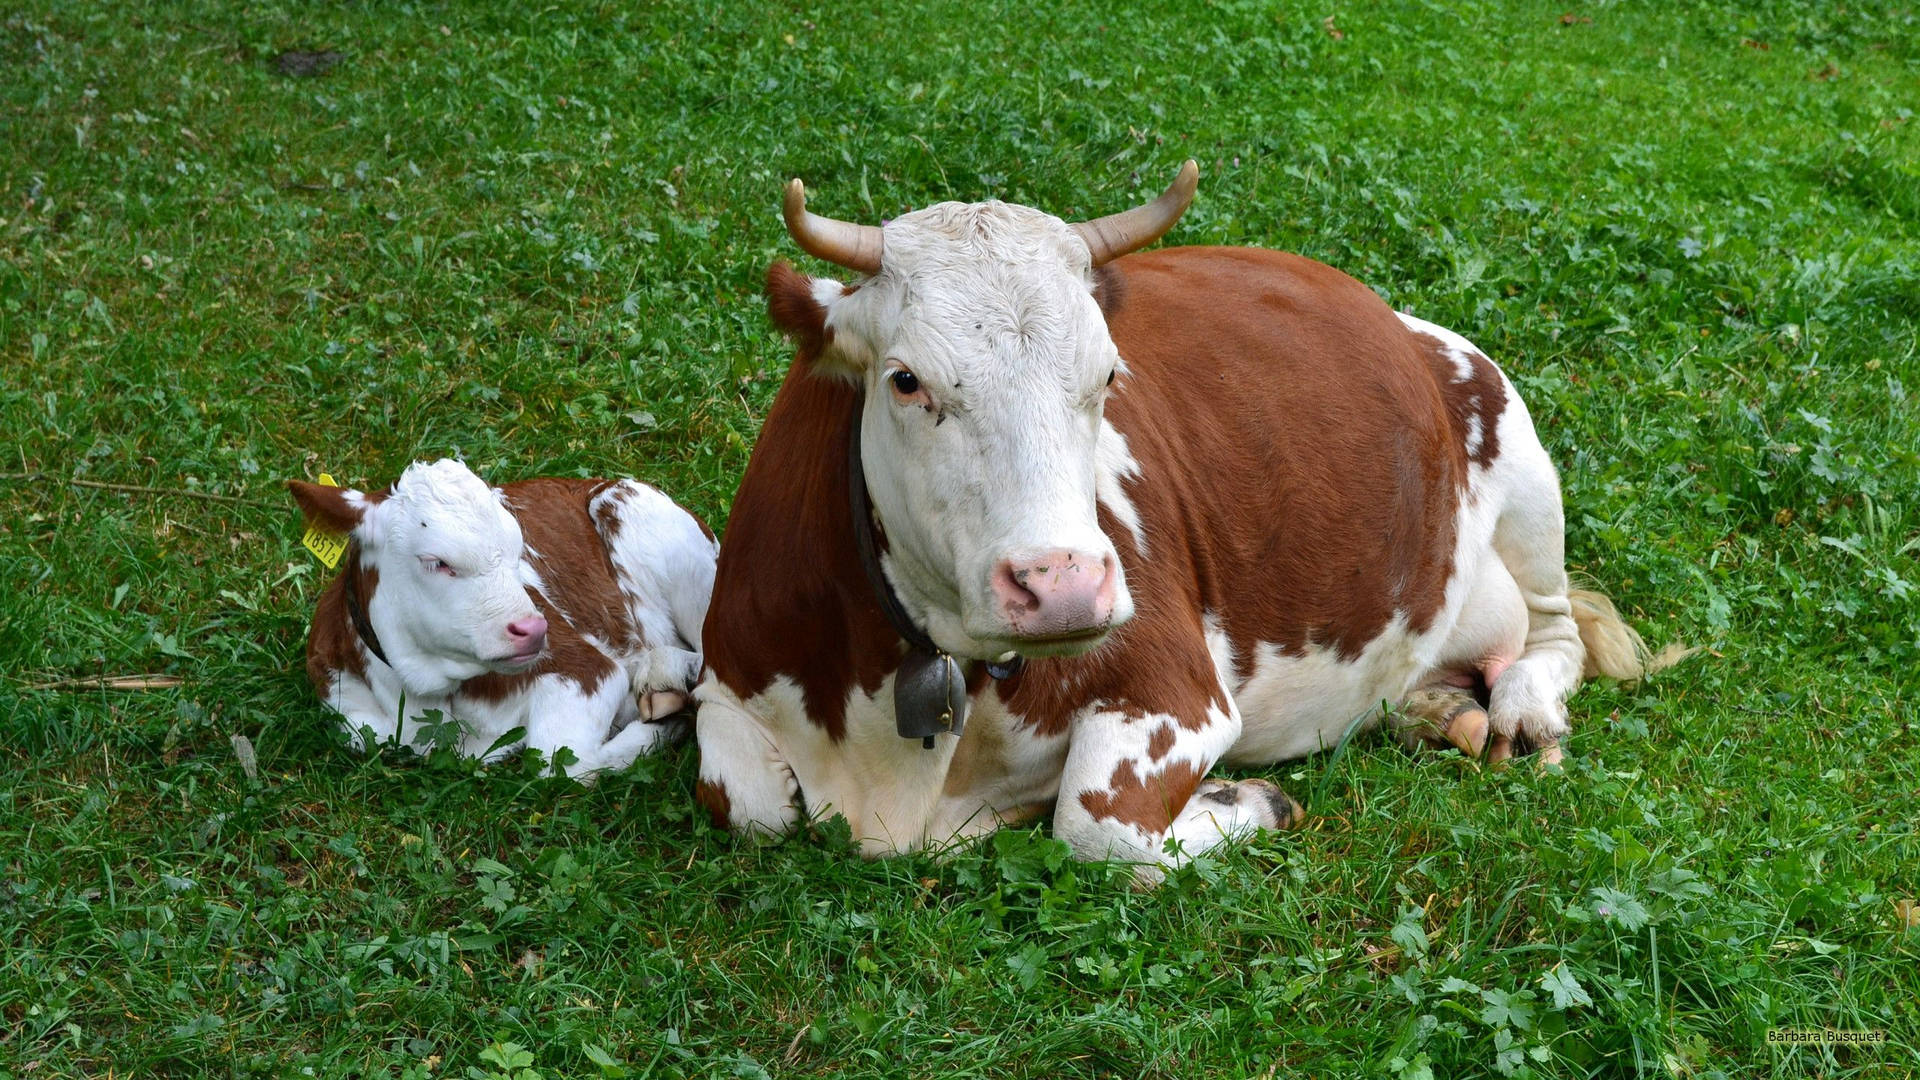 A Peaceful Moment Between A Mother Cow And Her Calf